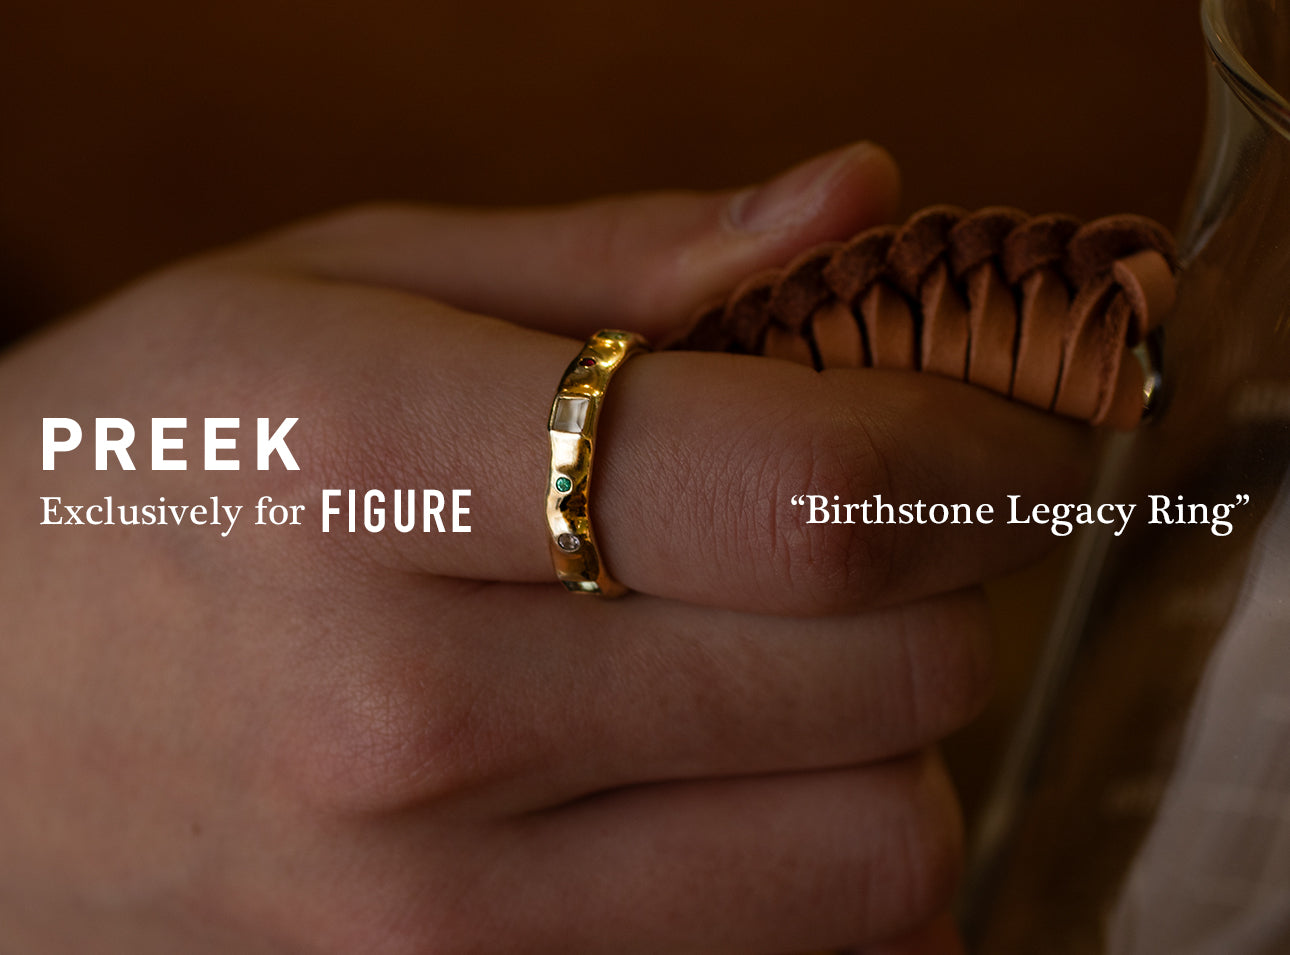 PREEK EXCLUSIVELY FOR FIGURE “ Birthstone Legacy Ring ”